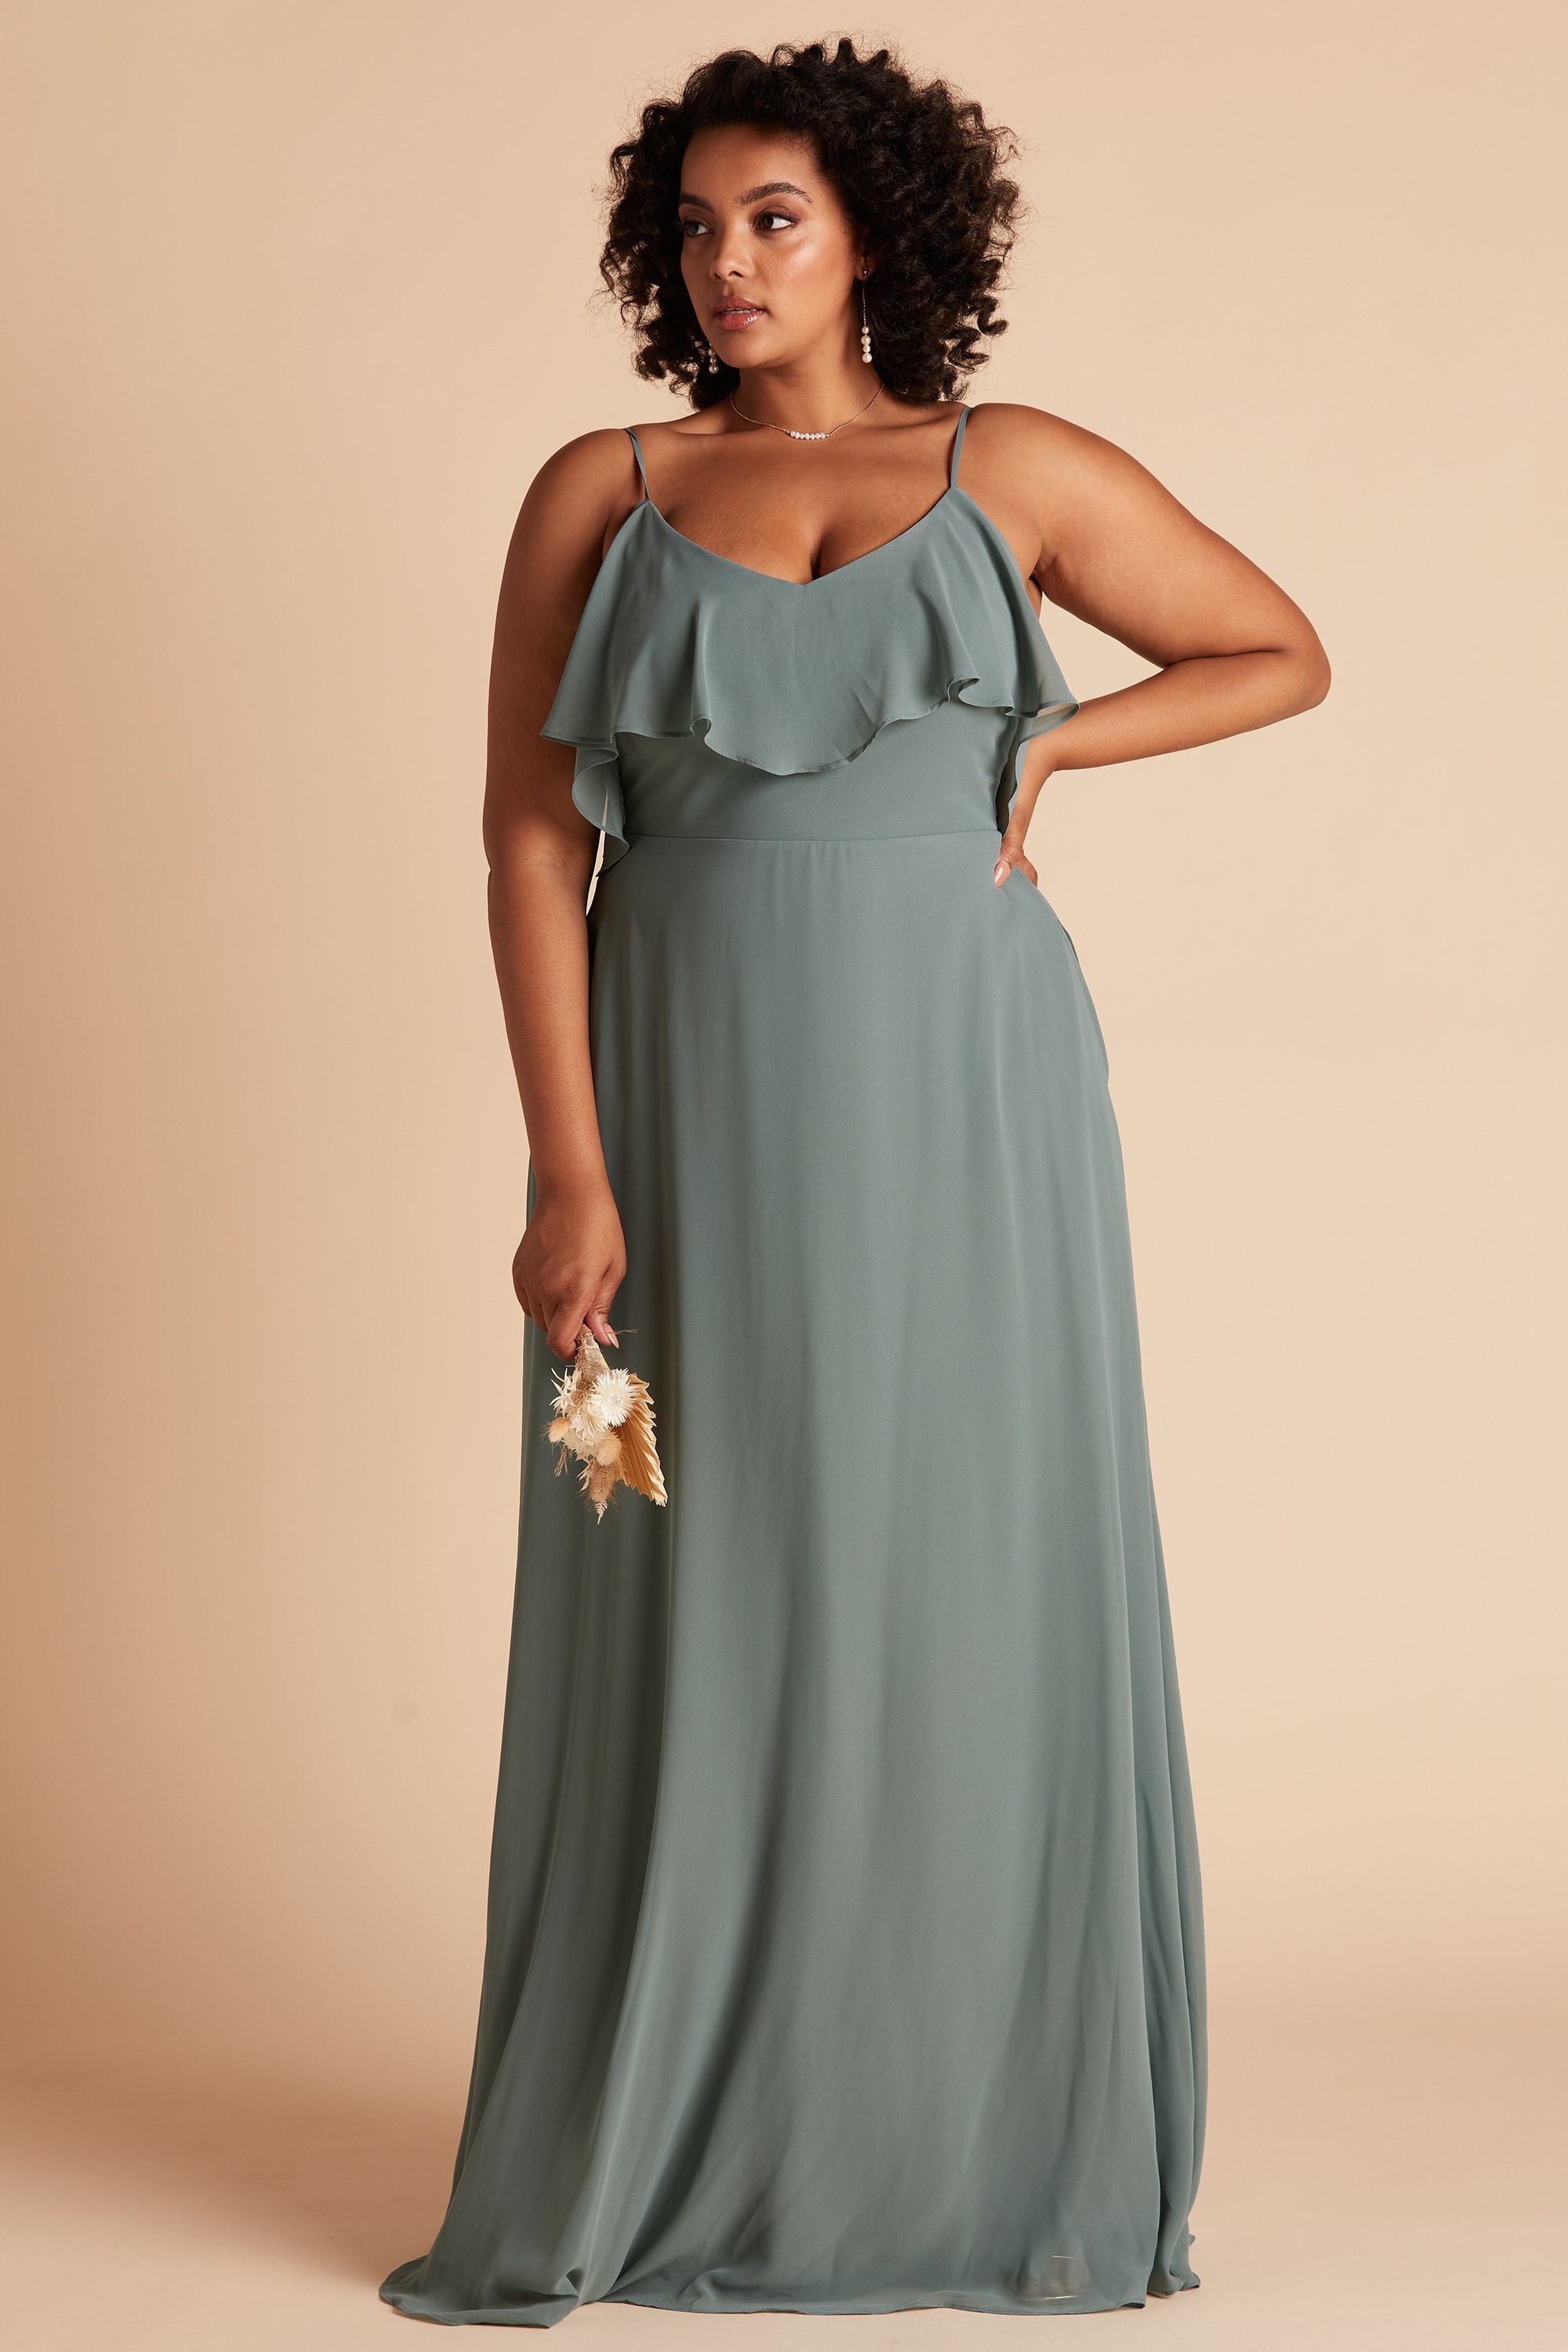 Jane convertible plus size bridesmaid dress in sea glass green chiffon by Birdy Grey, front view